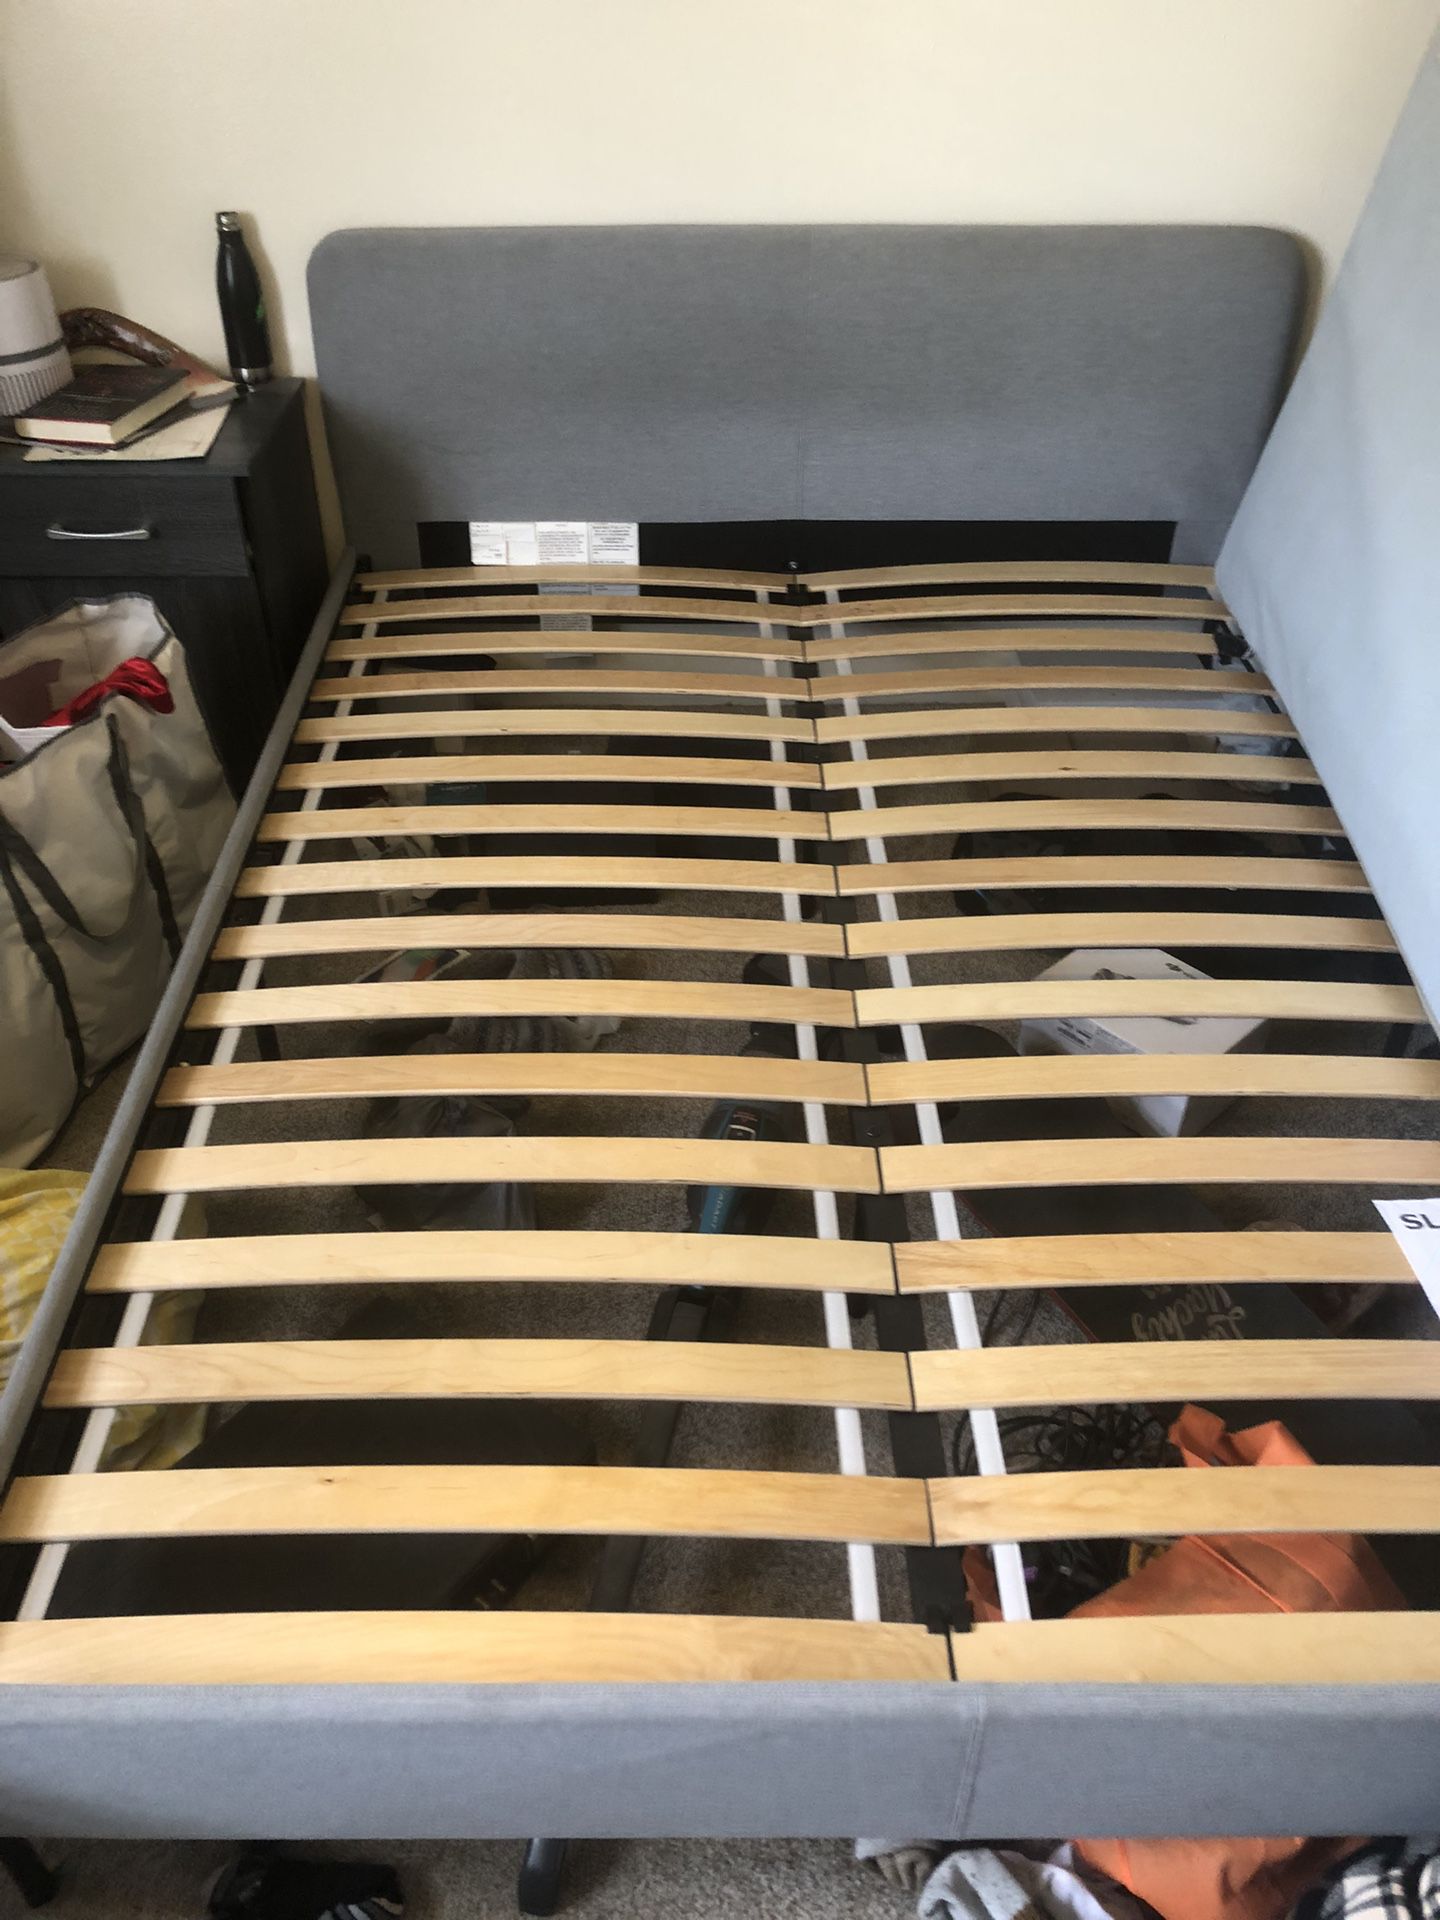 Queen Bed Frame With Wood Supports For Mattress. Good Condition 